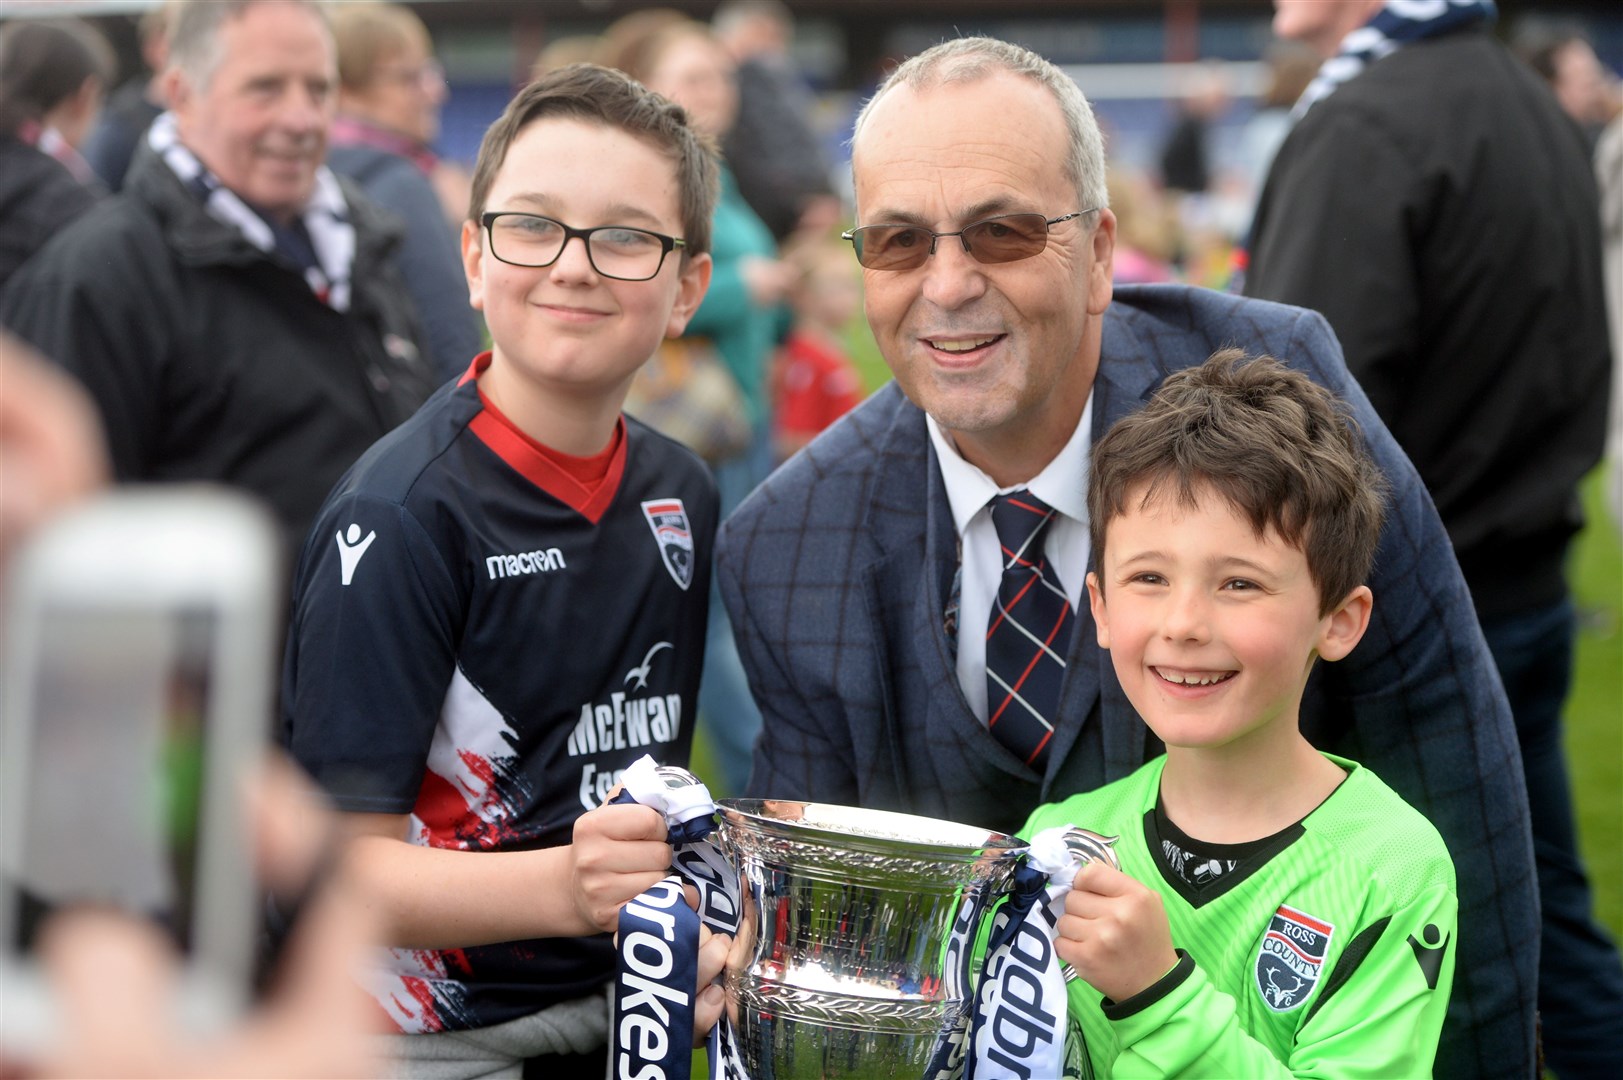 Ross County chairman Roy MacGregor says the future of football is at risk.